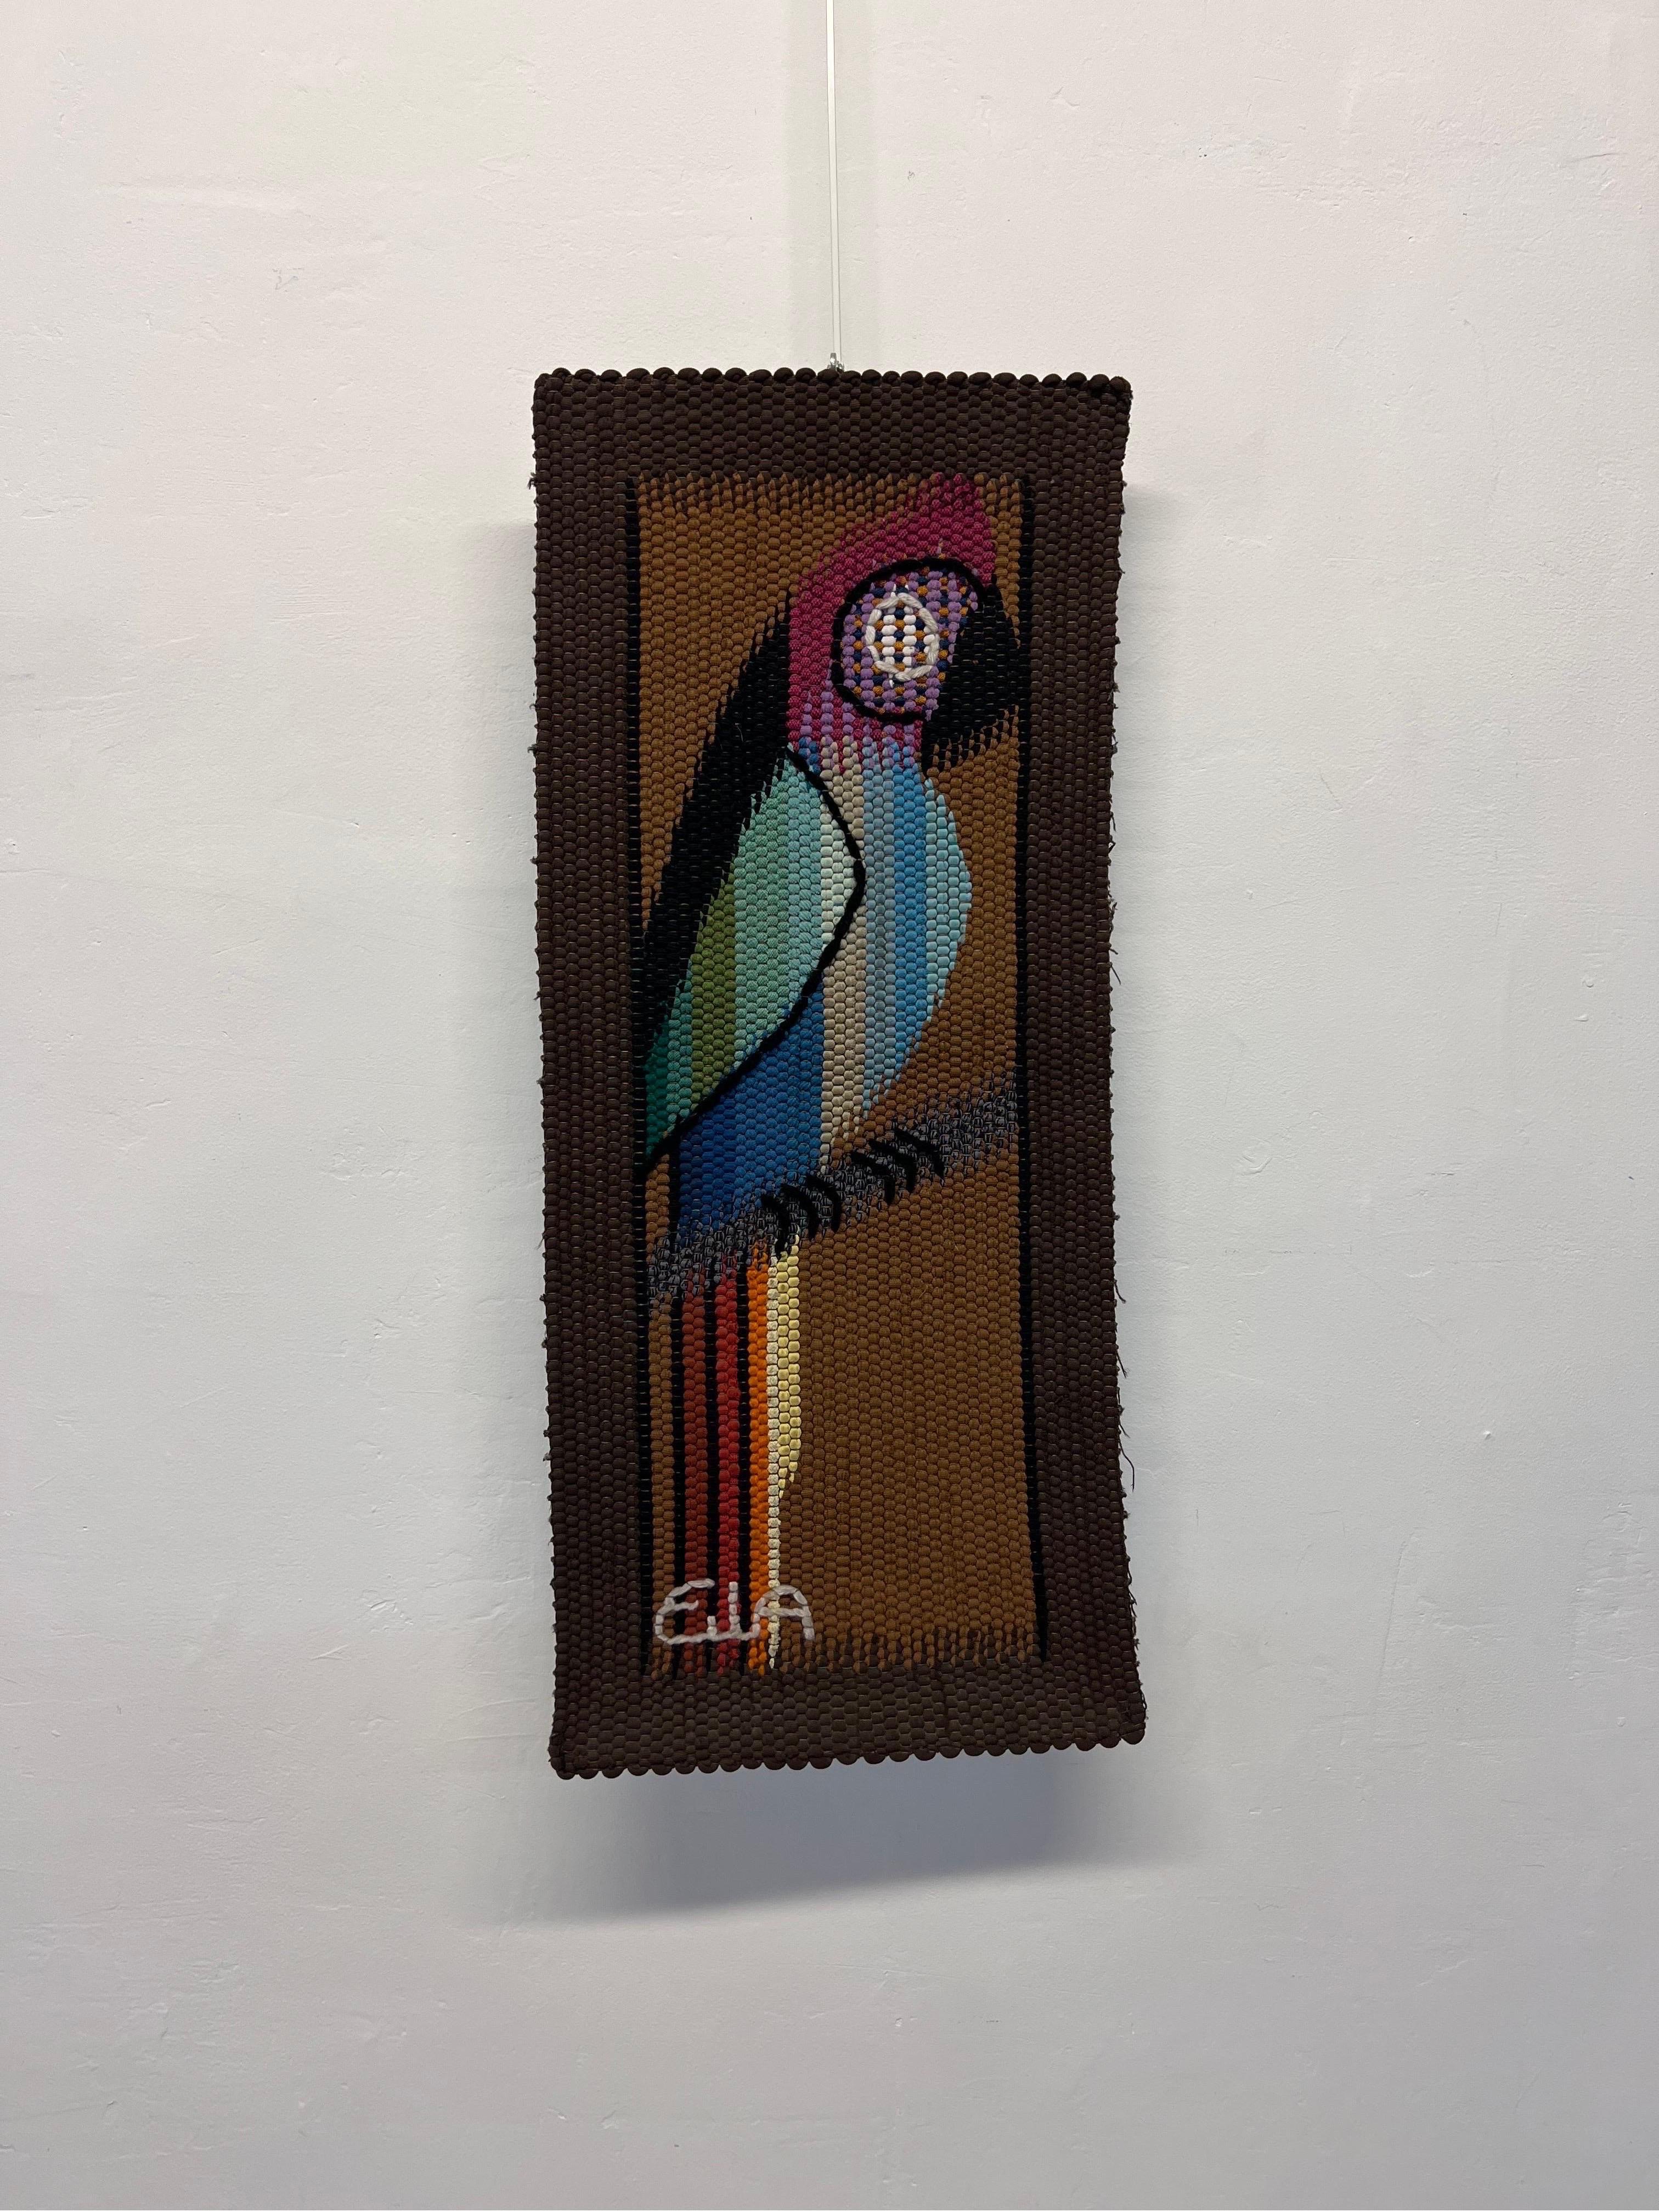 Midcentury Brazilian Modern wall art tapestry of a colorful Parrot by Eila Ampula, Brazil.